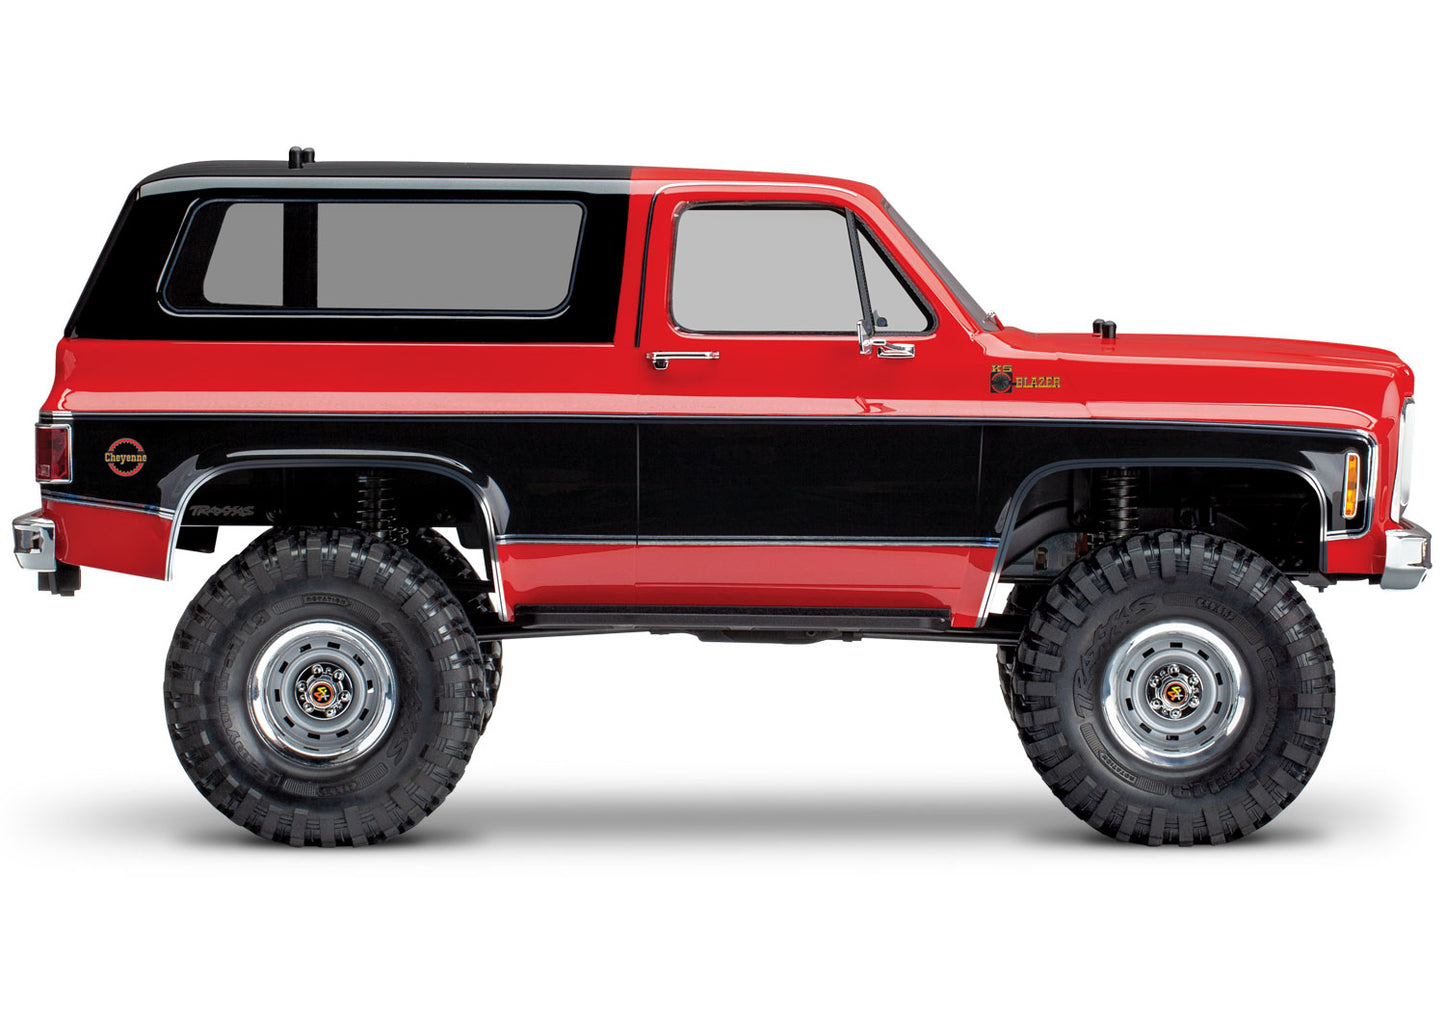 1979 Blazer Red 1/10th Scale Crawler Package